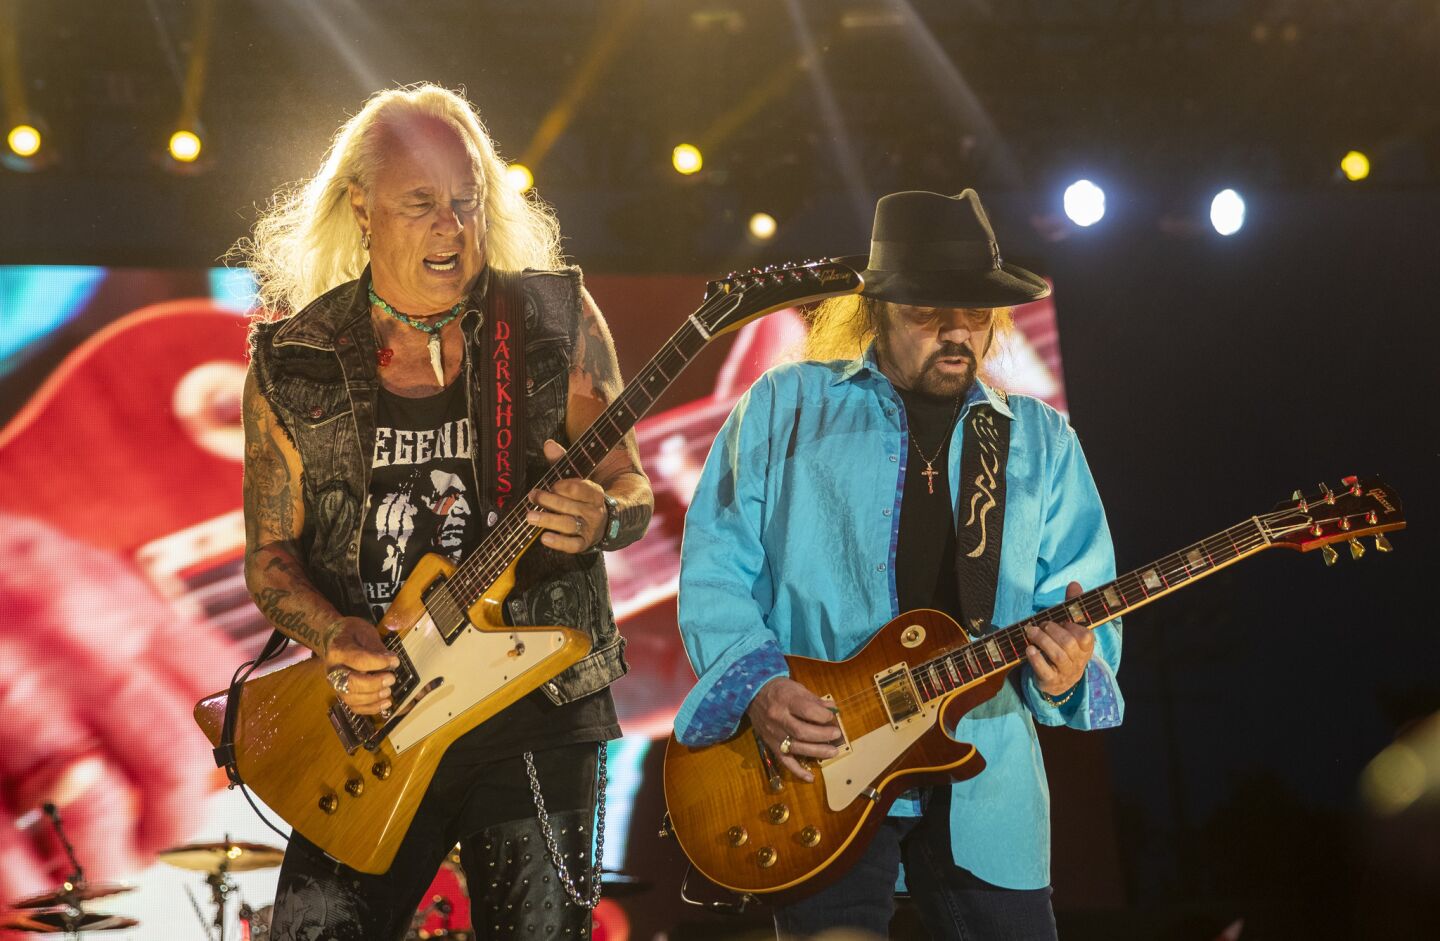 Lynyrd Skynyrd guitarists Rickey Medlocke, left, and Gary Rossington perform on the Palomino Stage at the 2019 Stagecoach Country Music Festival at the Empire Polo Fields in Indio, Calif.